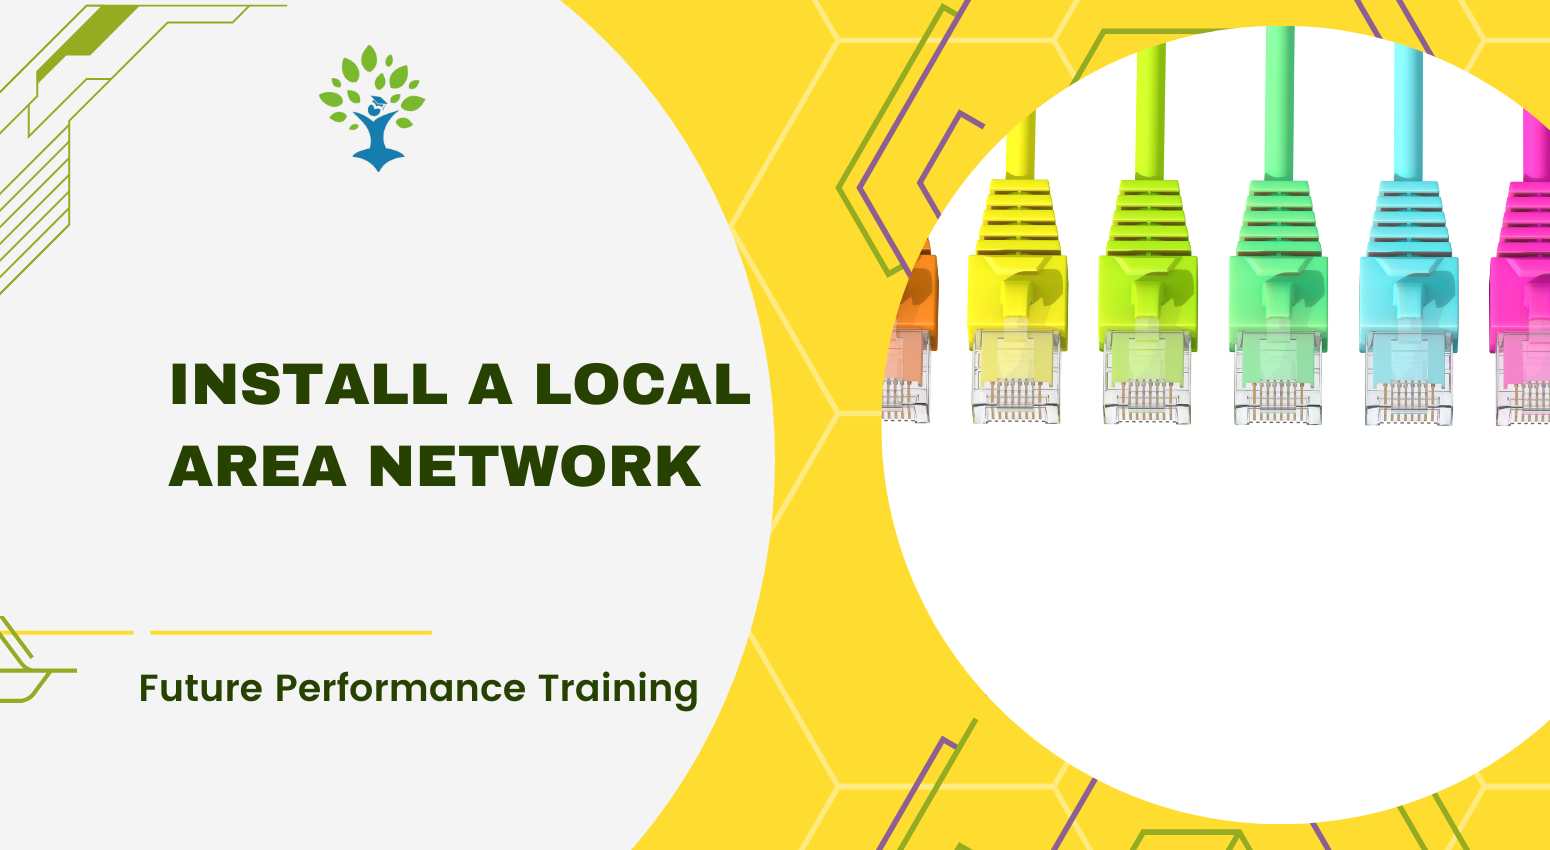 Install a Local Area Network 